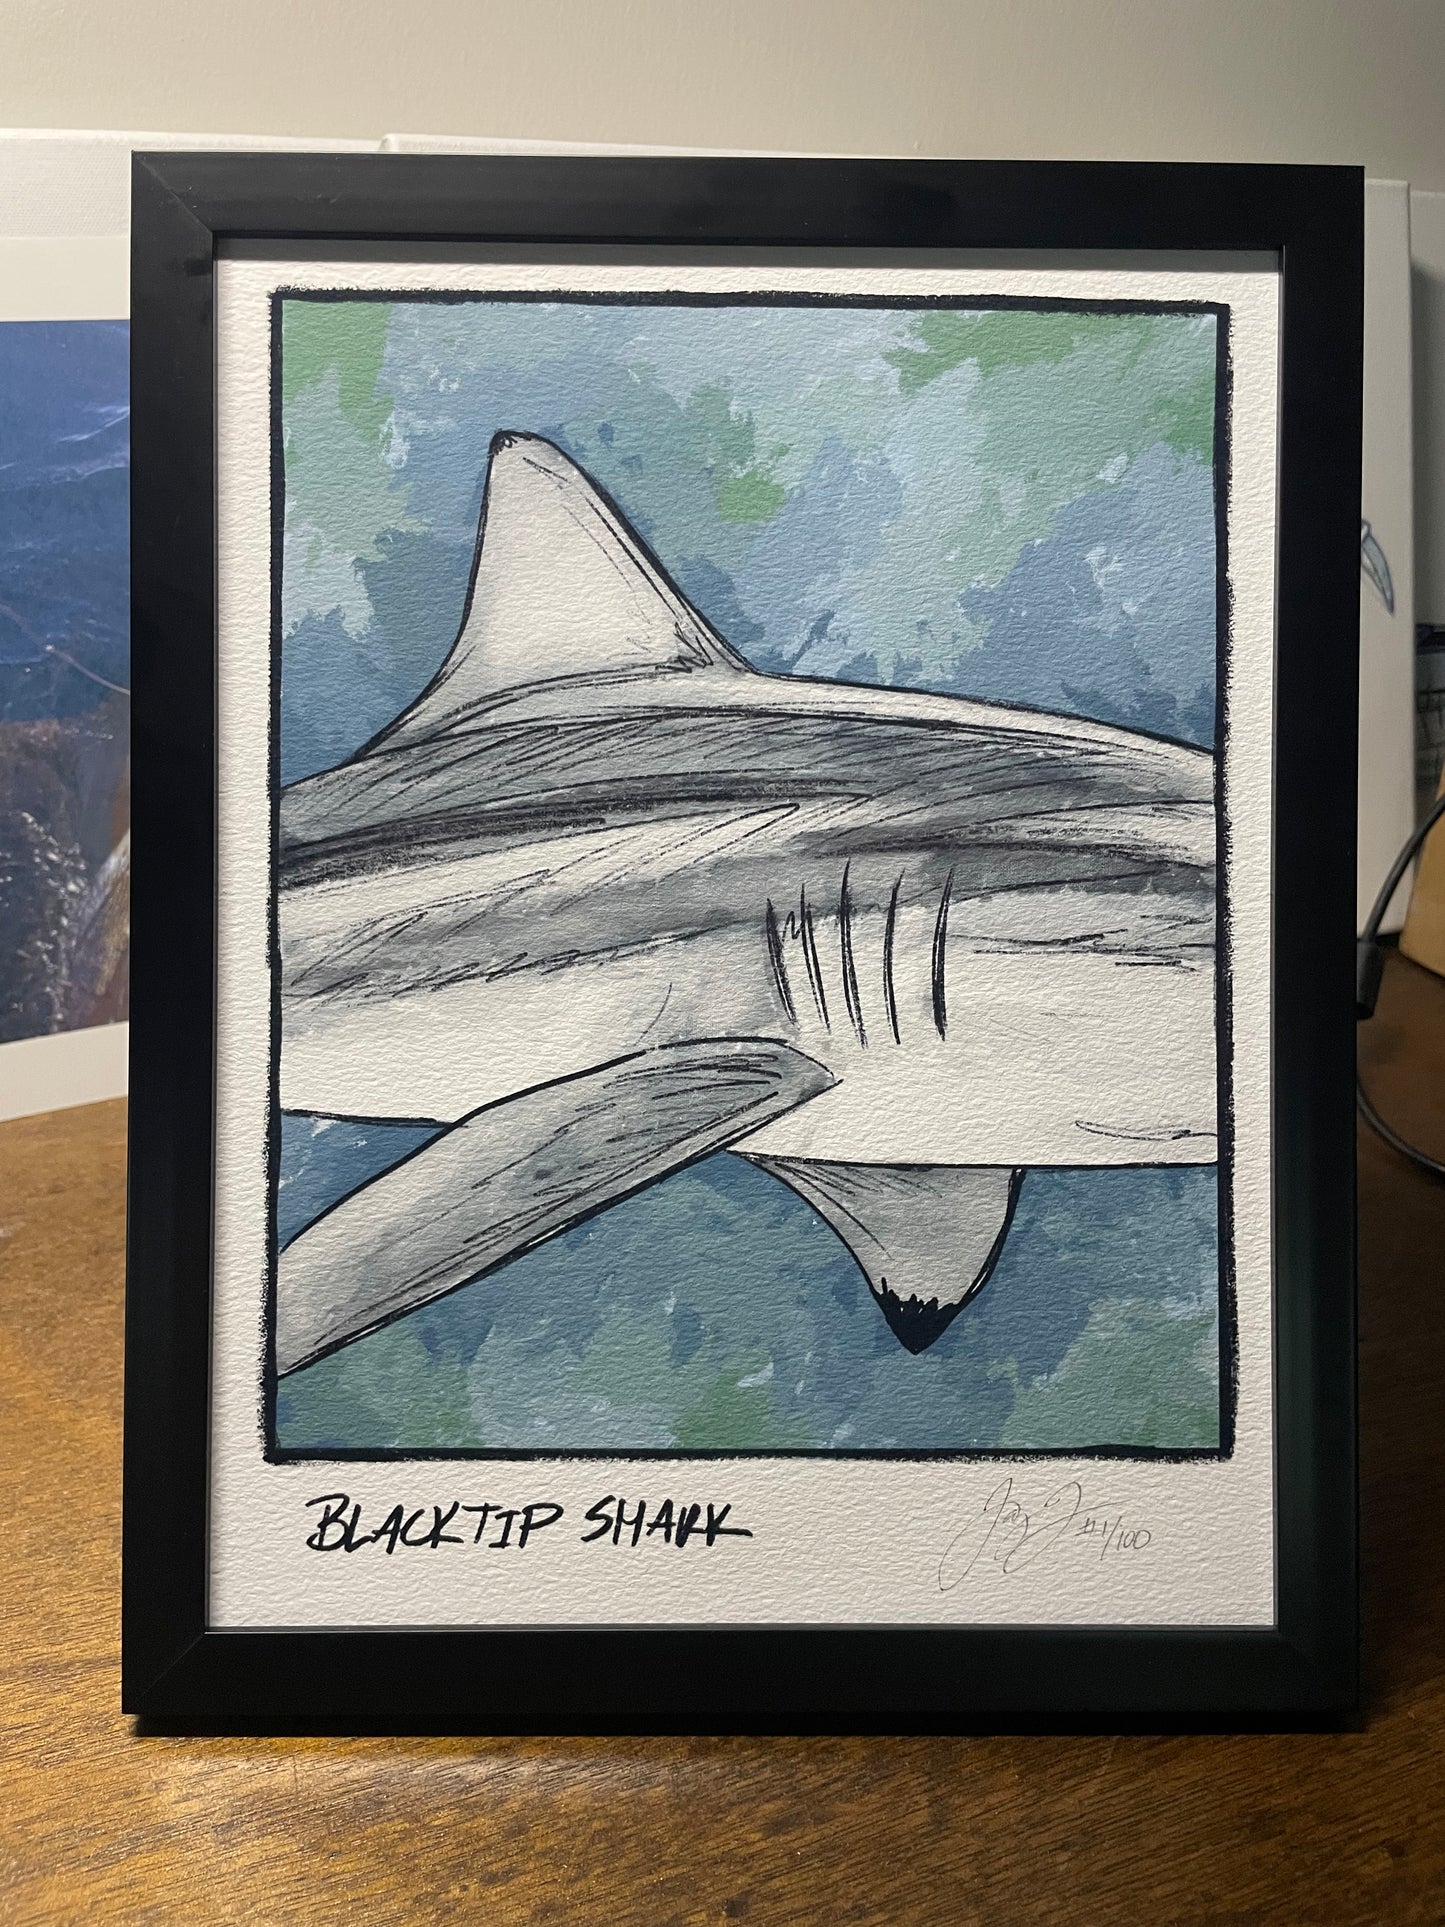 Blacktip Shark Closeup Print Ed. of 100 (Frame not included)